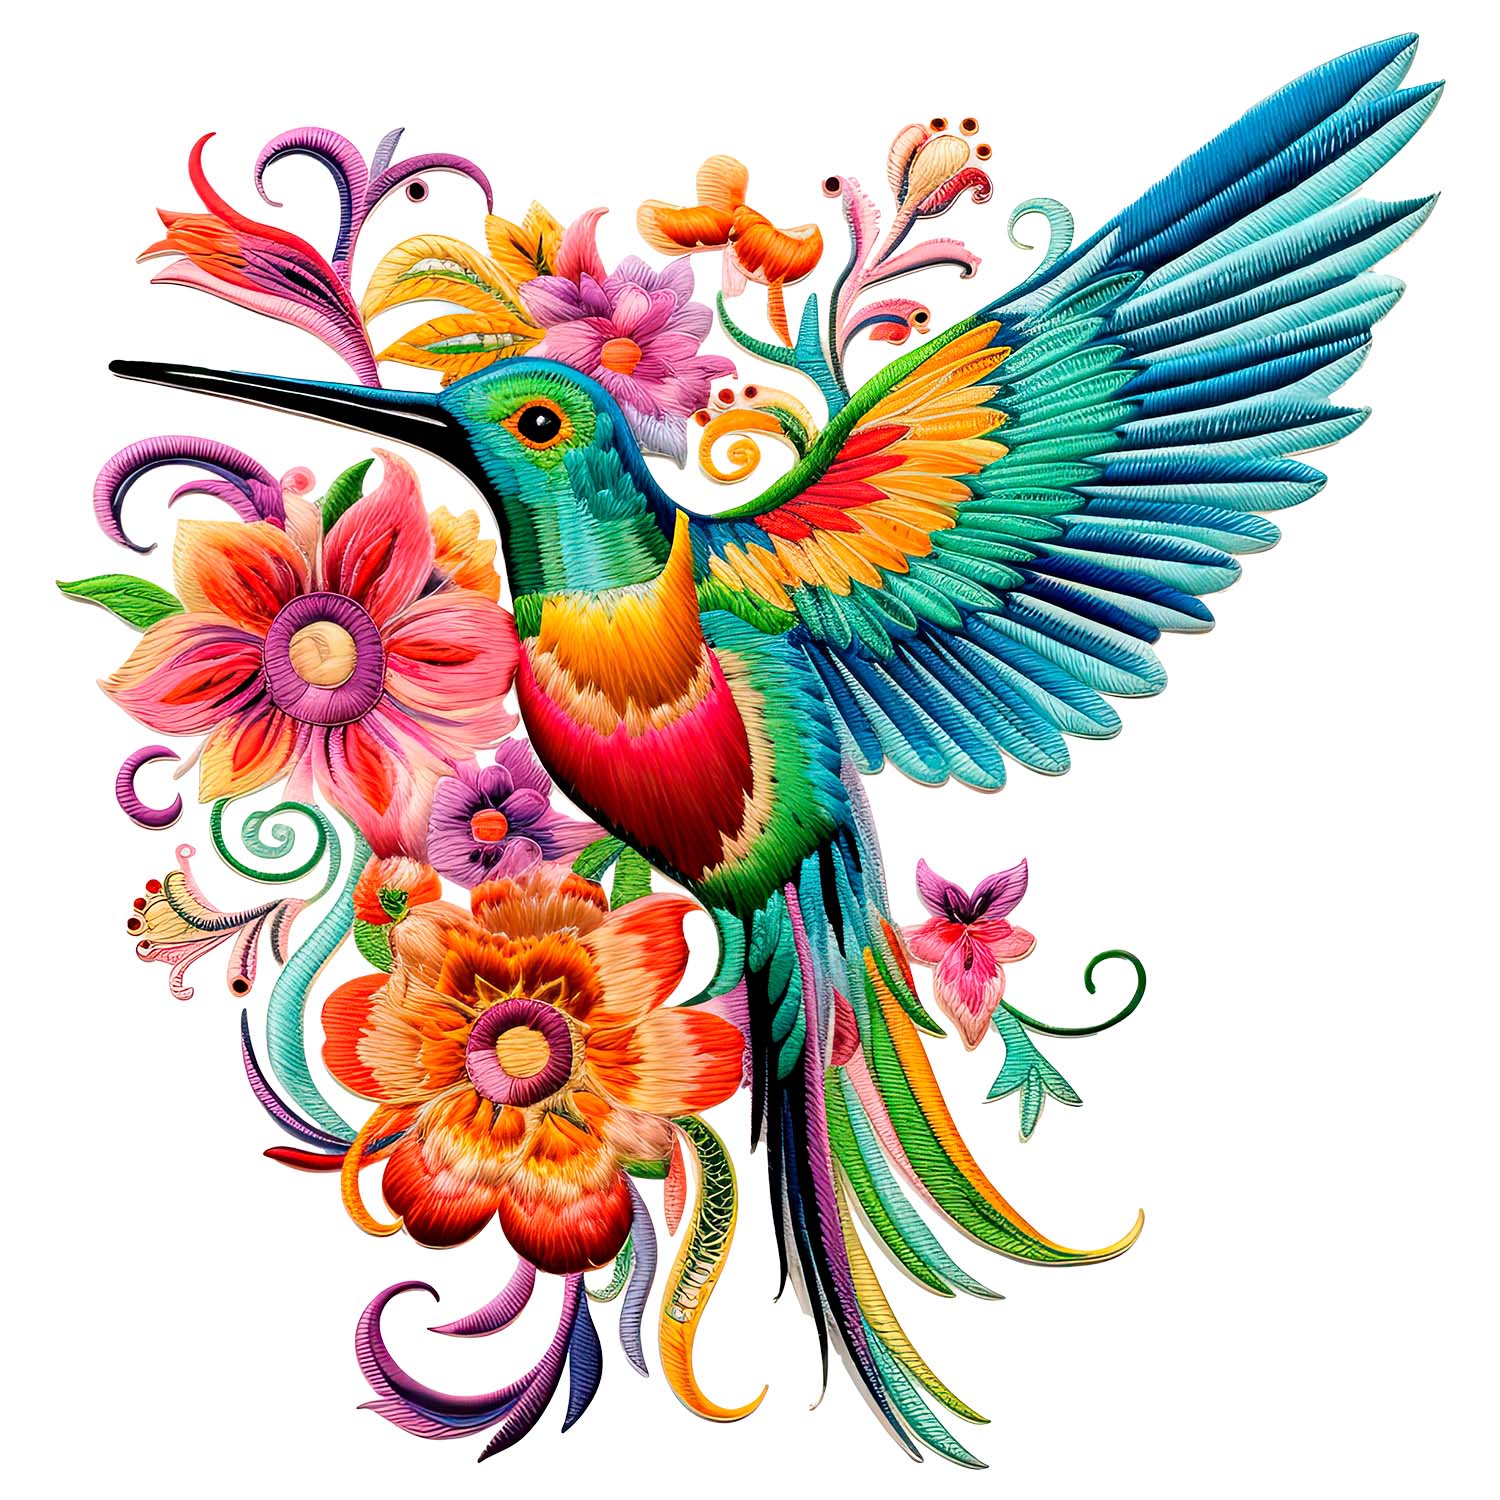 hummingbird and flowers with embroidery effect